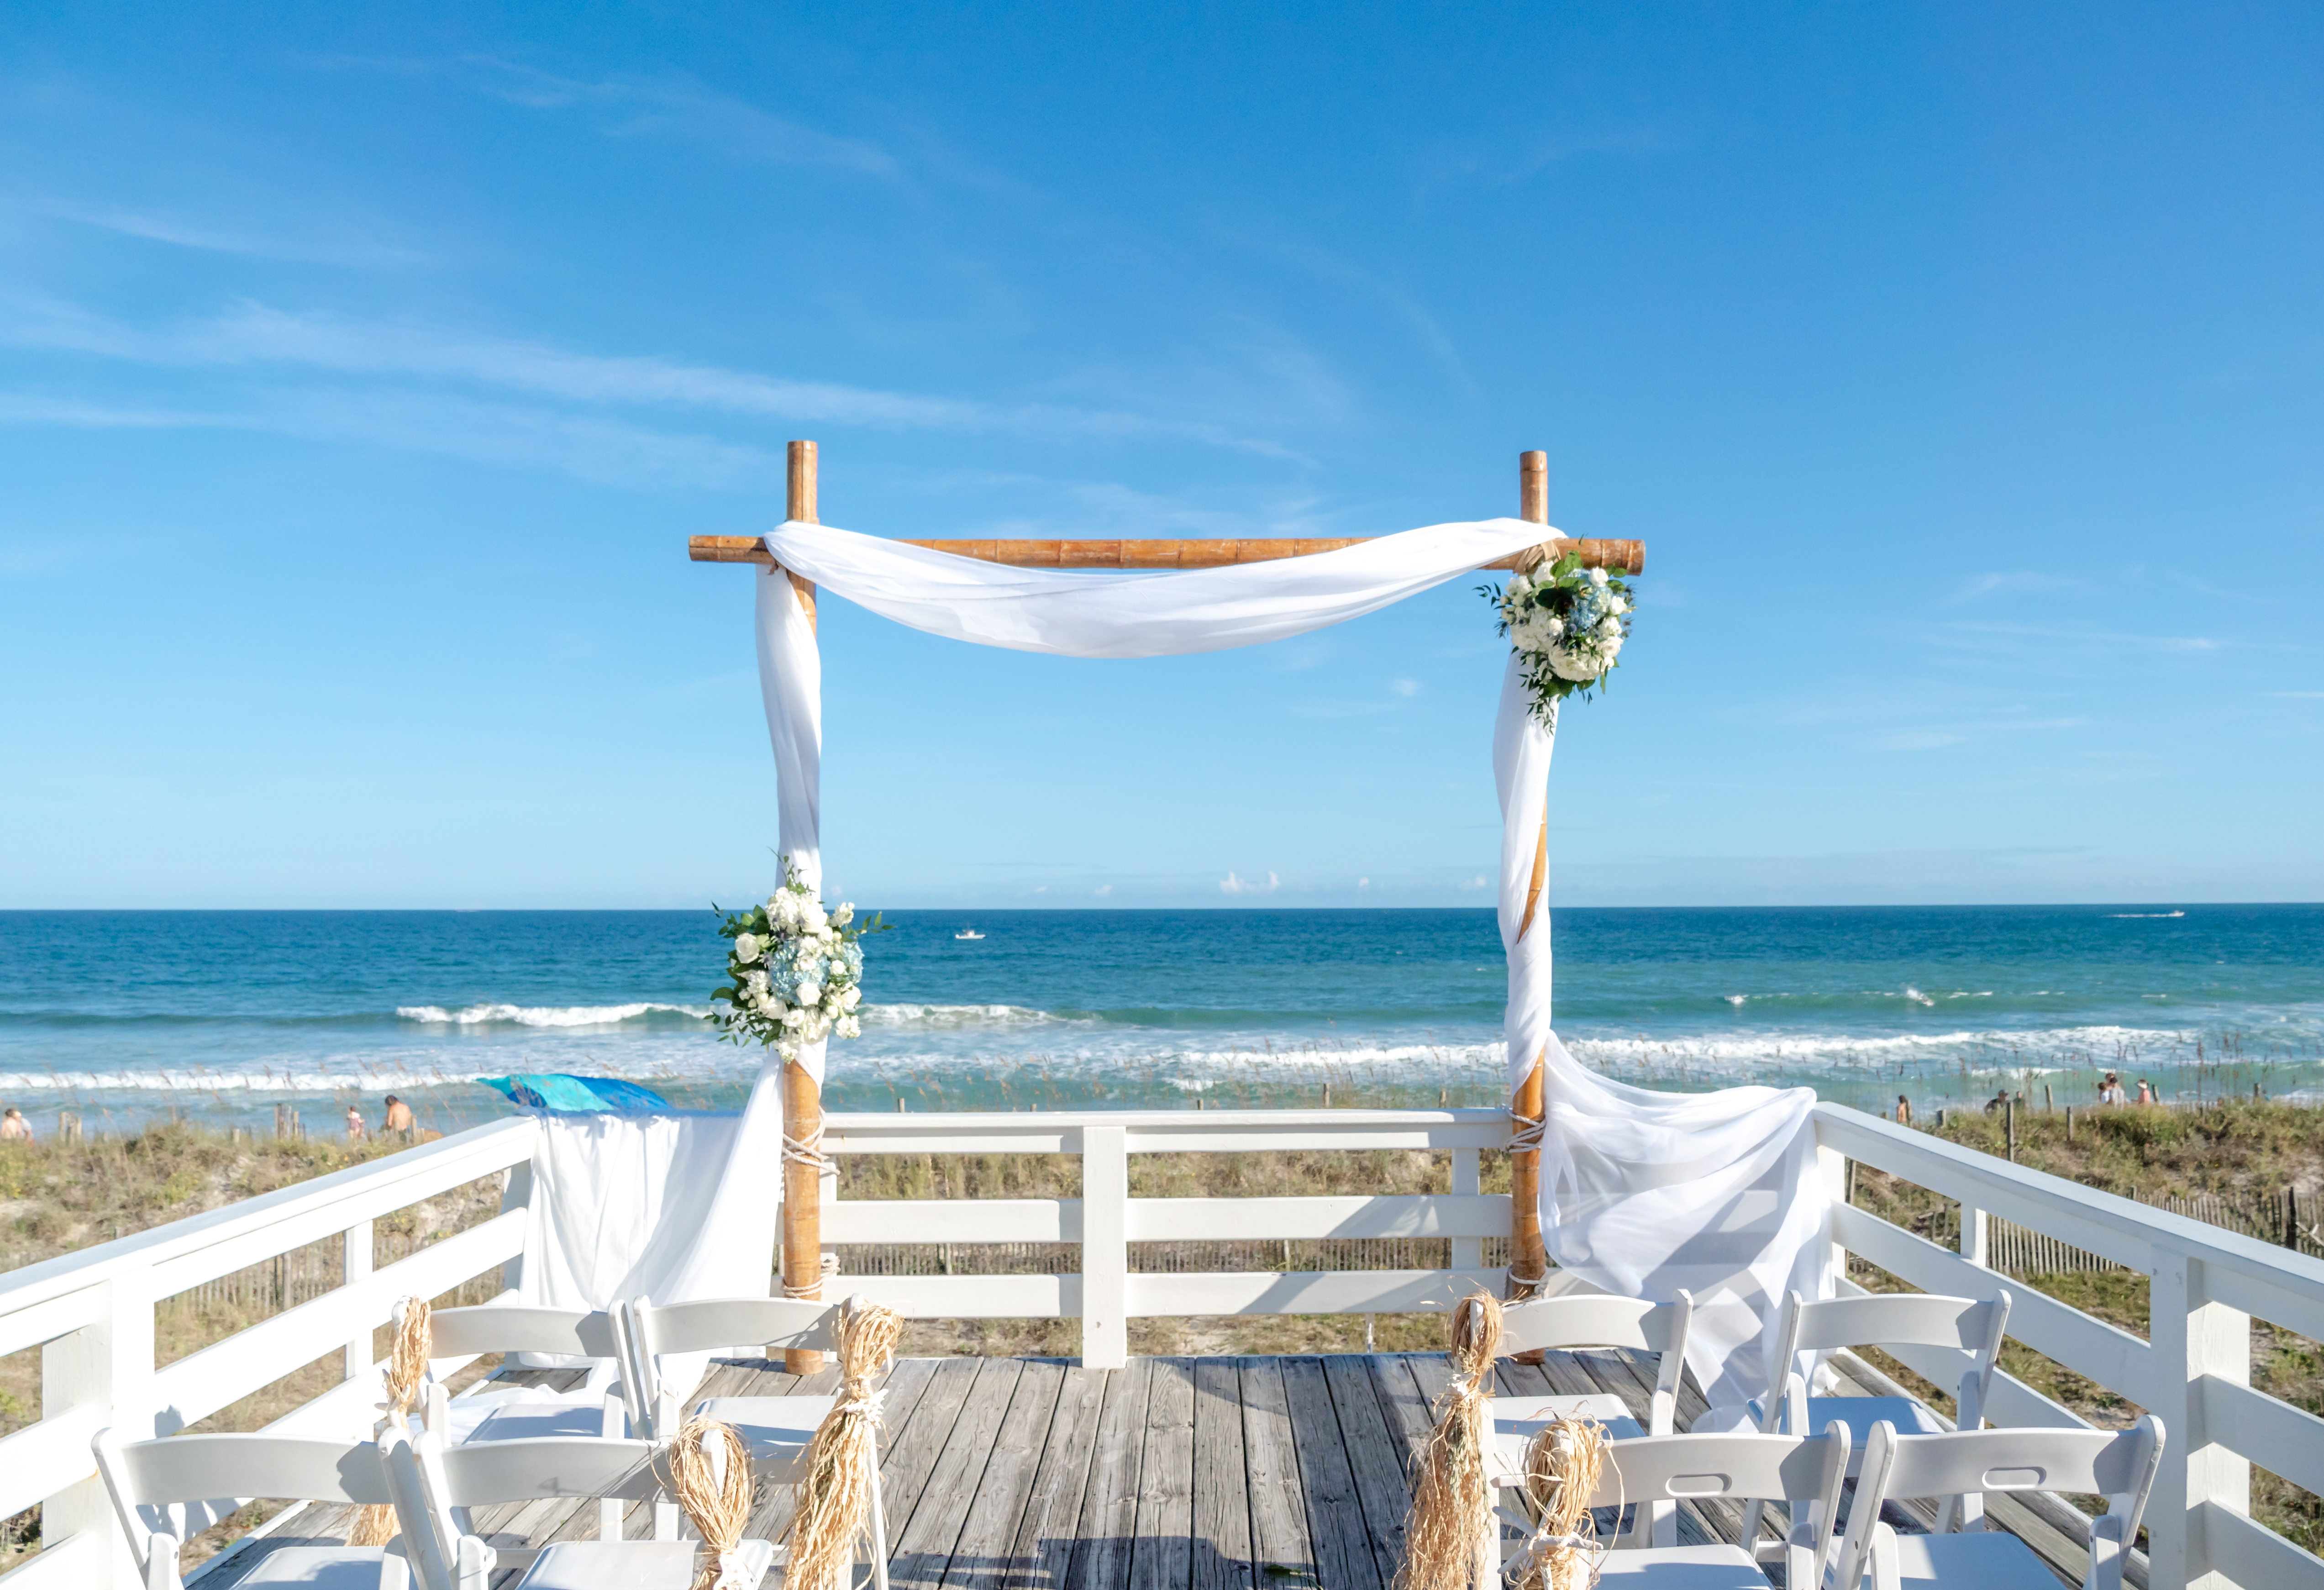 Wedding ceremony set up on a wooden deck in front of the ocean with blue hydrangeas and white roses.